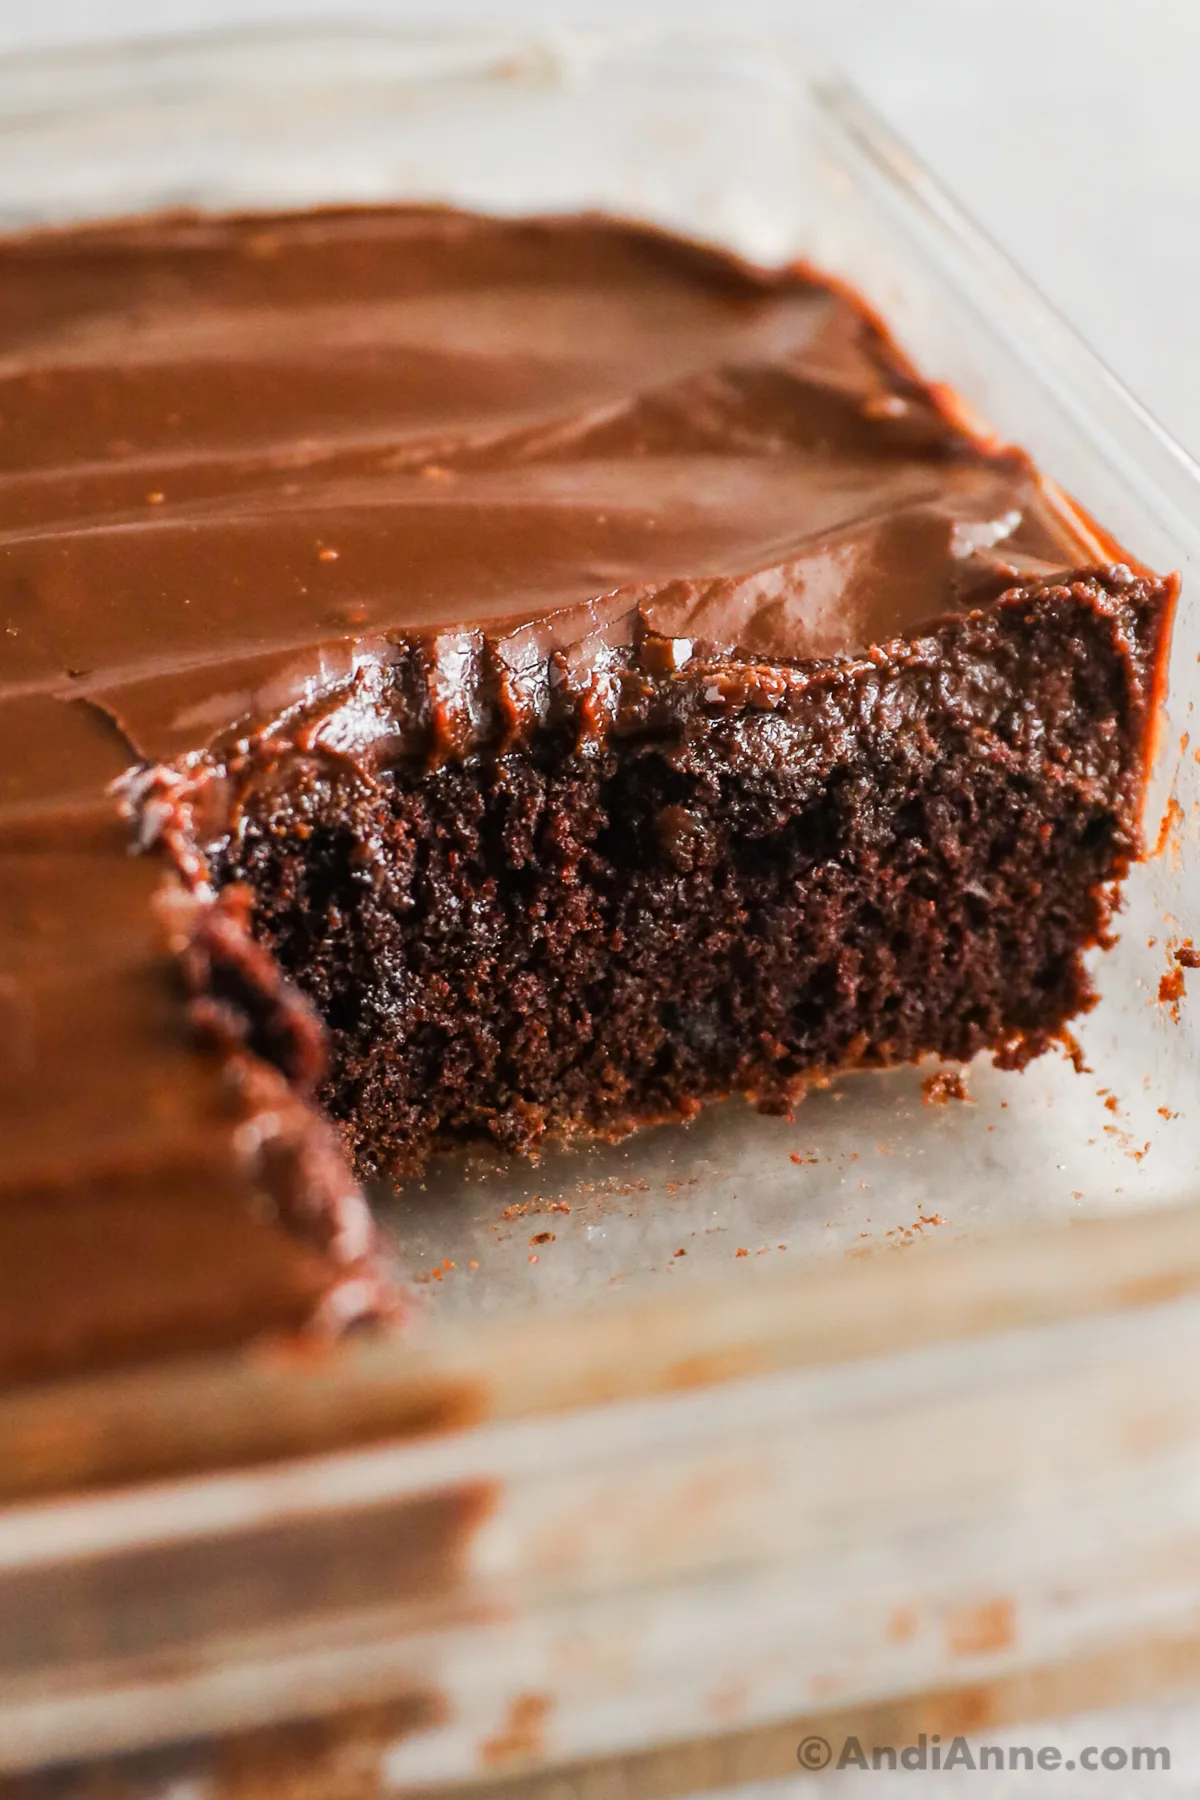 A slice of chocolate cake cut out in a glass baking dish.